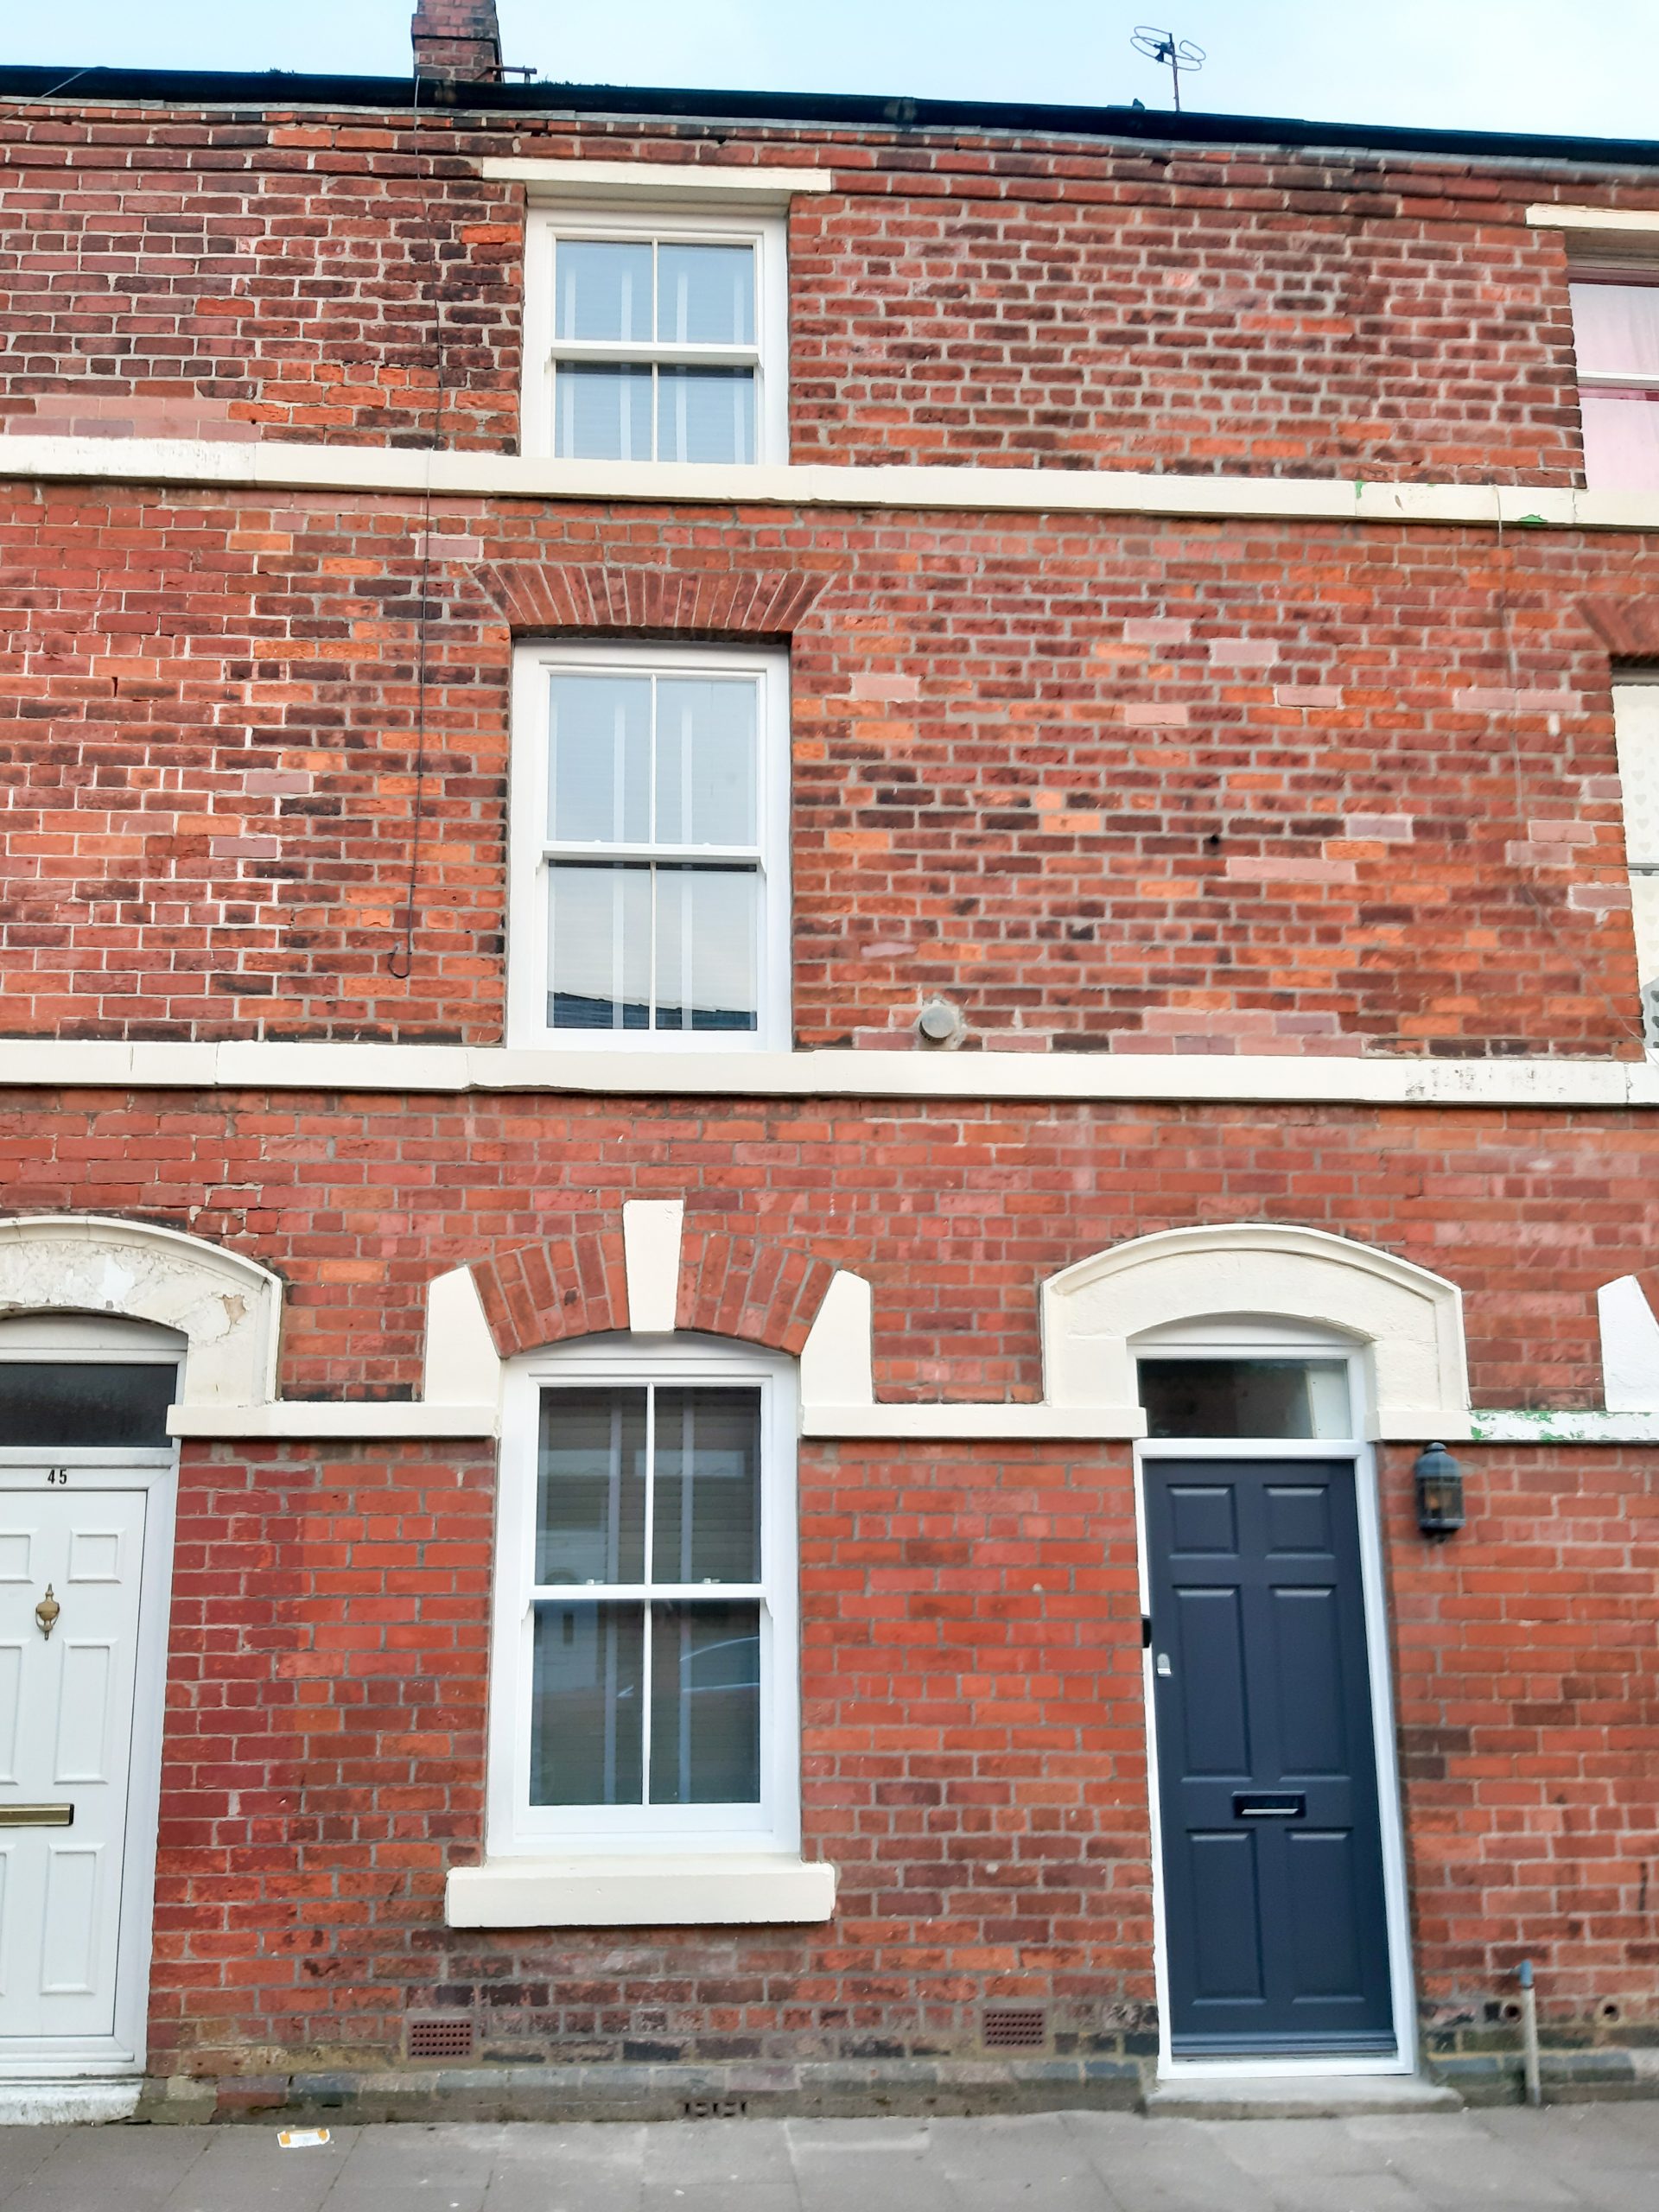 3 Bed to 5 Bed HMO Conversion - Propertunities (1)